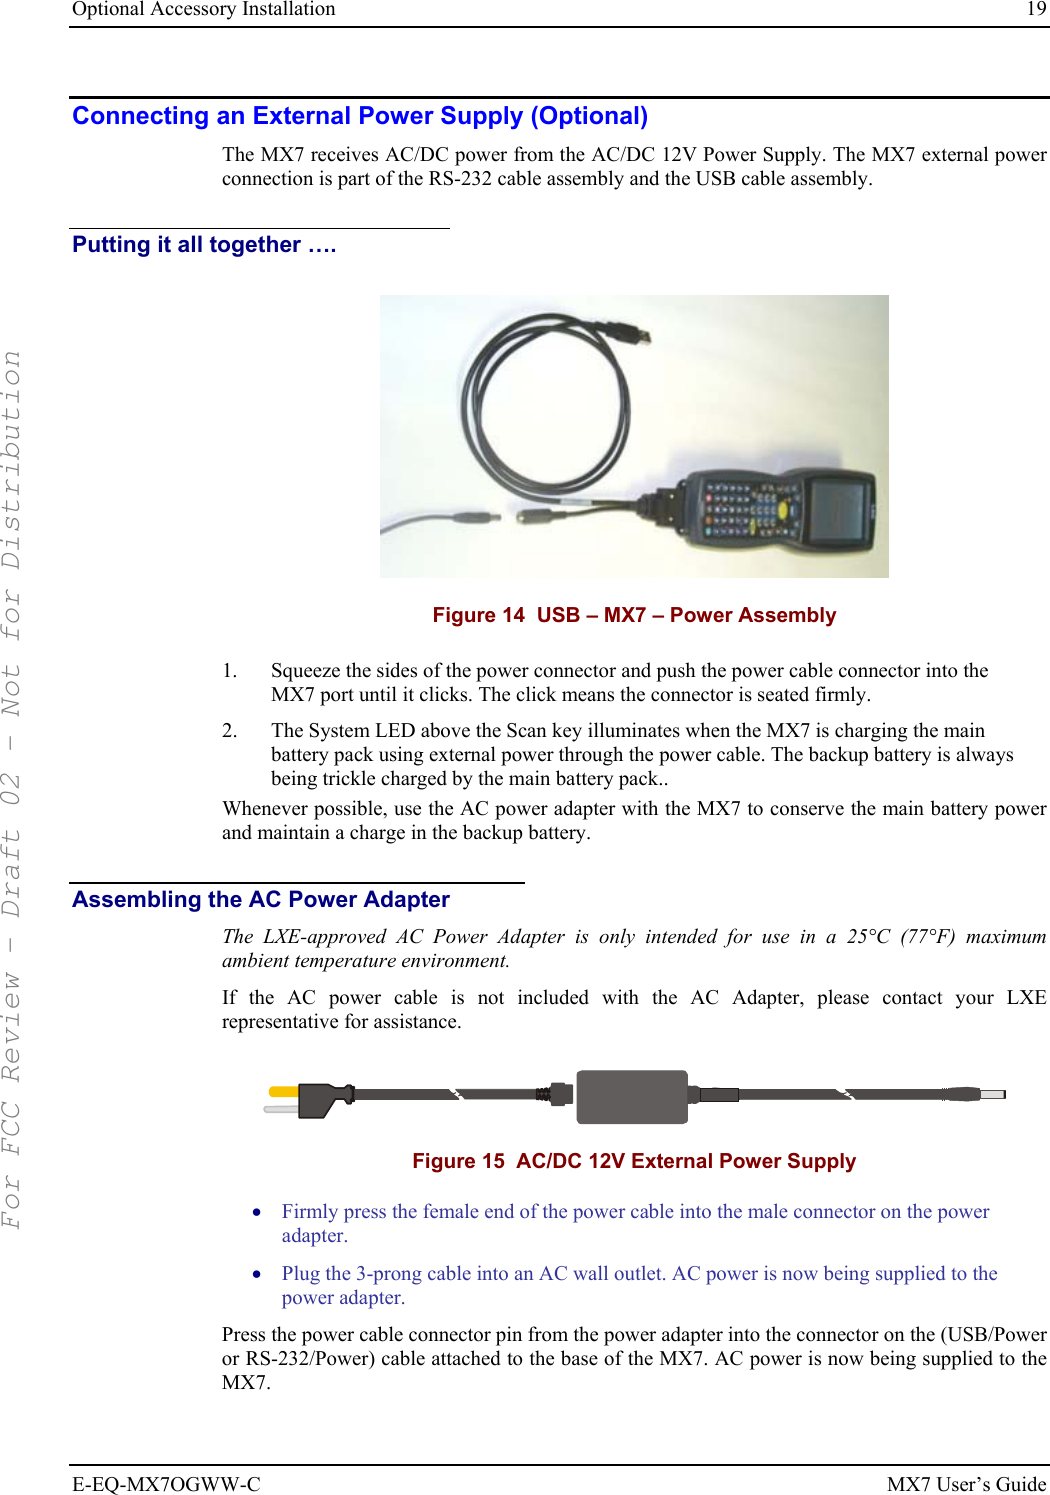 Optional Accessory Installation  19 E-EQ-MX7OGWW-C MX7 User’s Guide Connecting an External Power Supply (Optional) The MX7 receives AC/DC power from the AC/DC 12V Power Supply. The MX7 external power connection is part of the RS-232 cable assembly and the USB cable assembly.  Putting it all together ….  Figure 14  USB – MX7 – Power Assembly 1.  Squeeze the sides of the power connector and push the power cable connector into the MX7 port until it clicks. The click means the connector is seated firmly. 2.  The System LED above the Scan key illuminates when the MX7 is charging the main battery pack using external power through the power cable. The backup battery is always being trickle charged by the main battery pack.. Whenever possible, use the AC power adapter with the MX7 to conserve the main battery power and maintain a charge in the backup battery. Assembling the AC Power Adapter The LXE-approved AC Power Adapter is only intended for use in a 25°C (77°F) maximum ambient temperature environment. If the AC power cable is not included with the AC Adapter, please contact your LXE representative for assistance.   Figure 15  AC/DC 12V External Power Supply • Firmly press the female end of the power cable into the male connector on the power adapter. • Plug the 3-prong cable into an AC wall outlet. AC power is now being supplied to the power adapter. Press the power cable connector pin from the power adapter into the connector on the (USB/Power or RS-232/Power) cable attached to the base of the MX7. AC power is now being supplied to the MX7. For FCC Review - Draft 02 - Not for Distribution